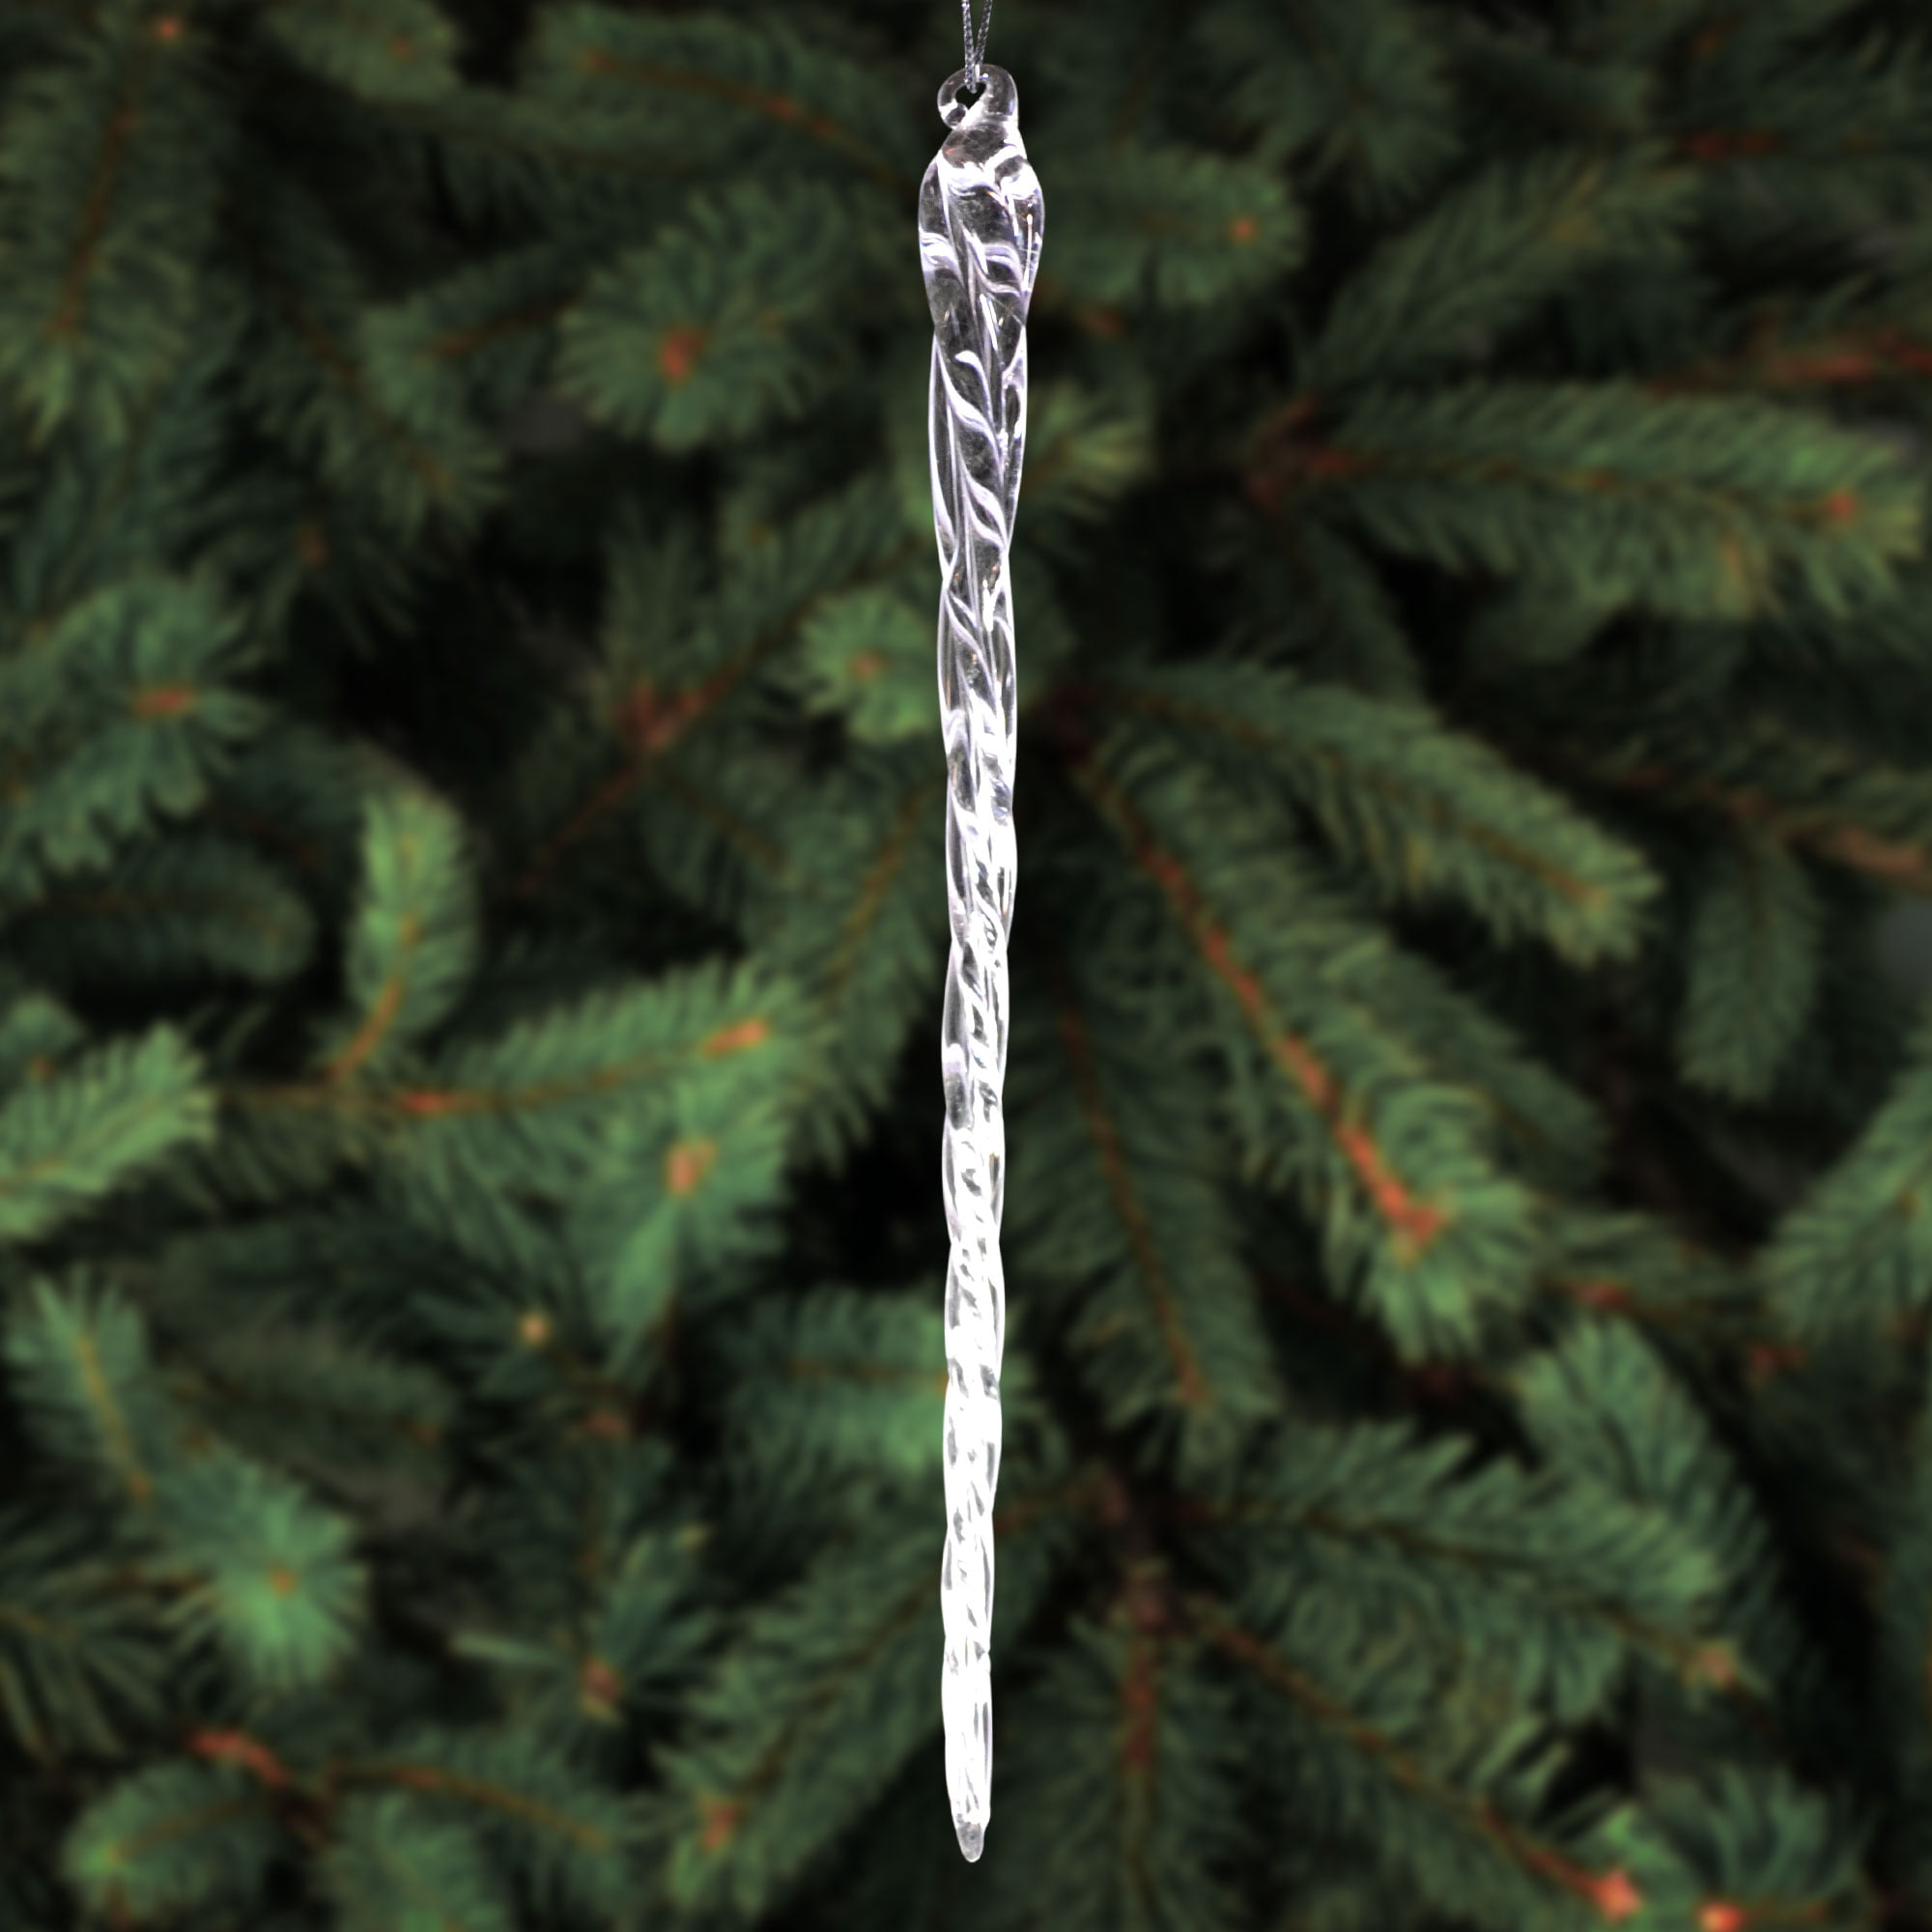 Details about   10pcs/set Clear Glass Icicle Ornaments-Winter Decorations for Christmas Tree